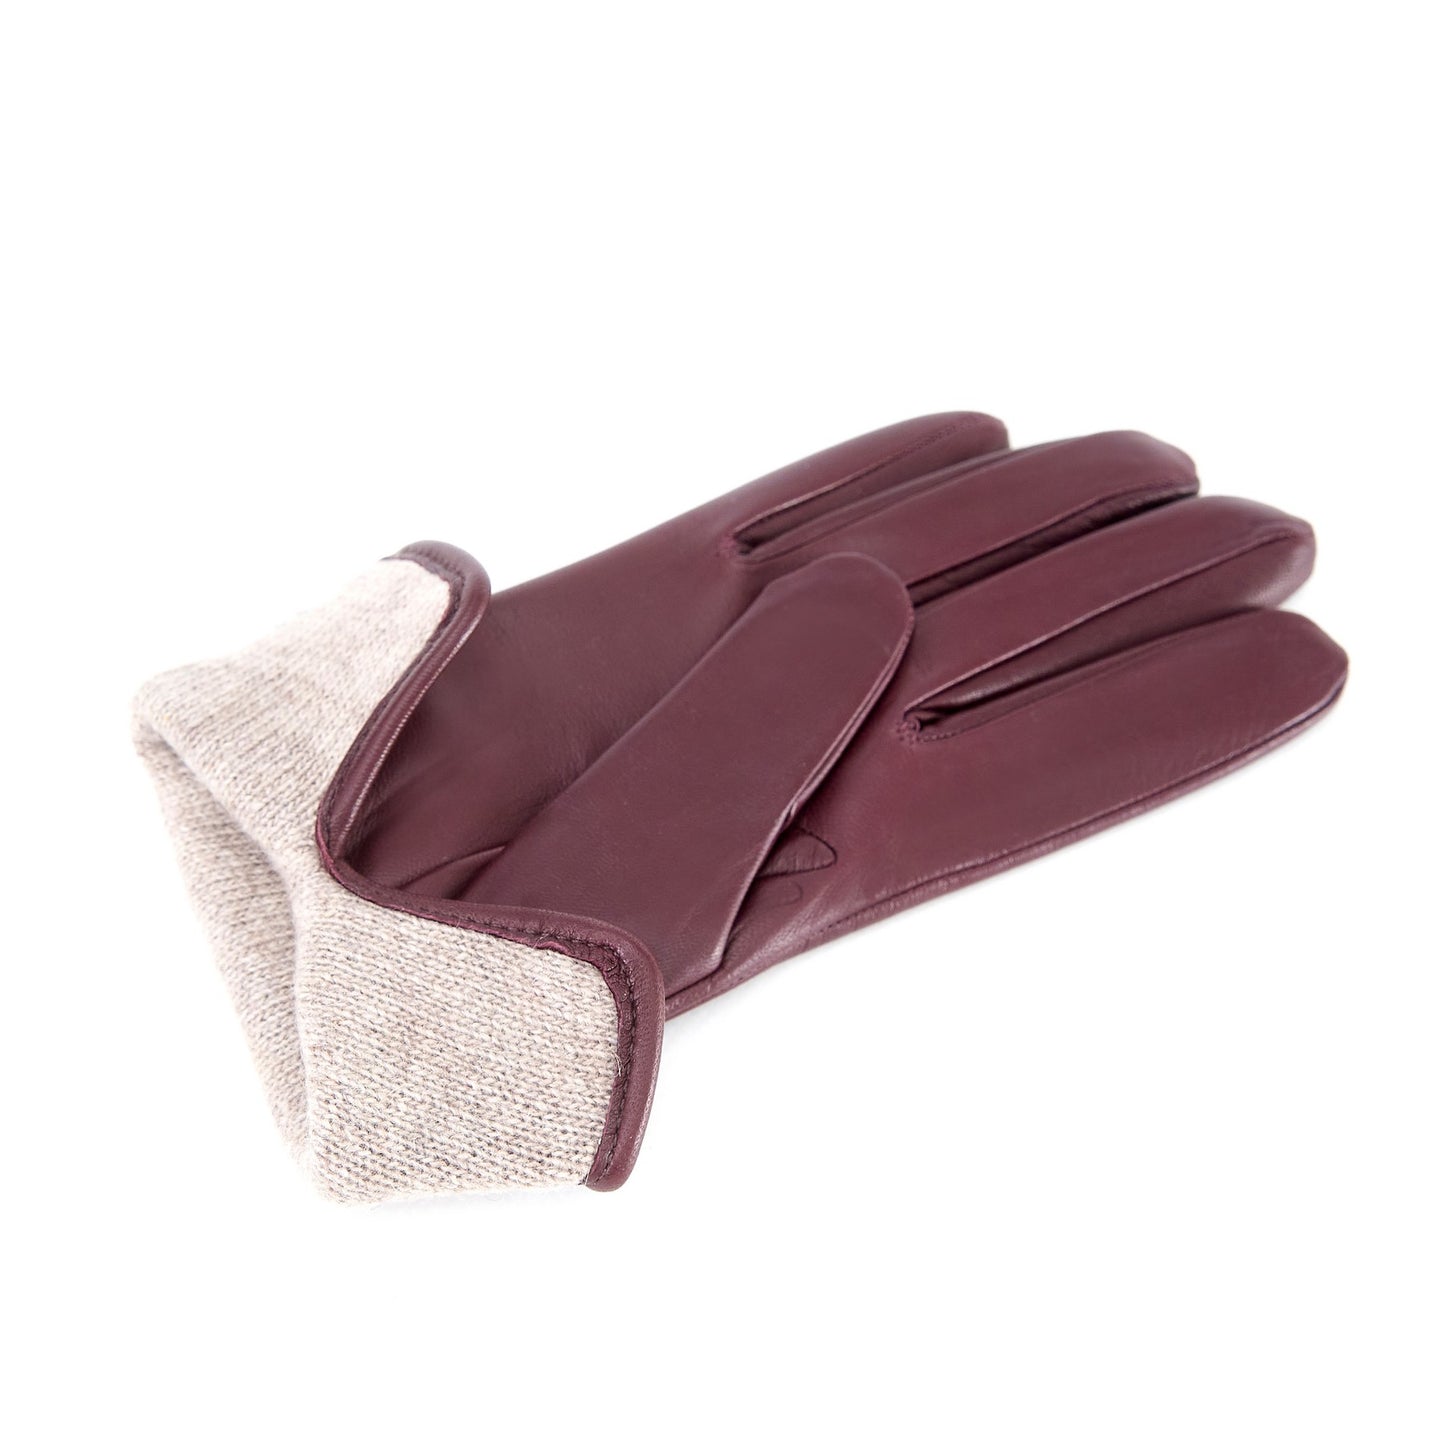 Women’s basic bordeaux soft nappa leather gloves with palm opening and mix cashmere lining